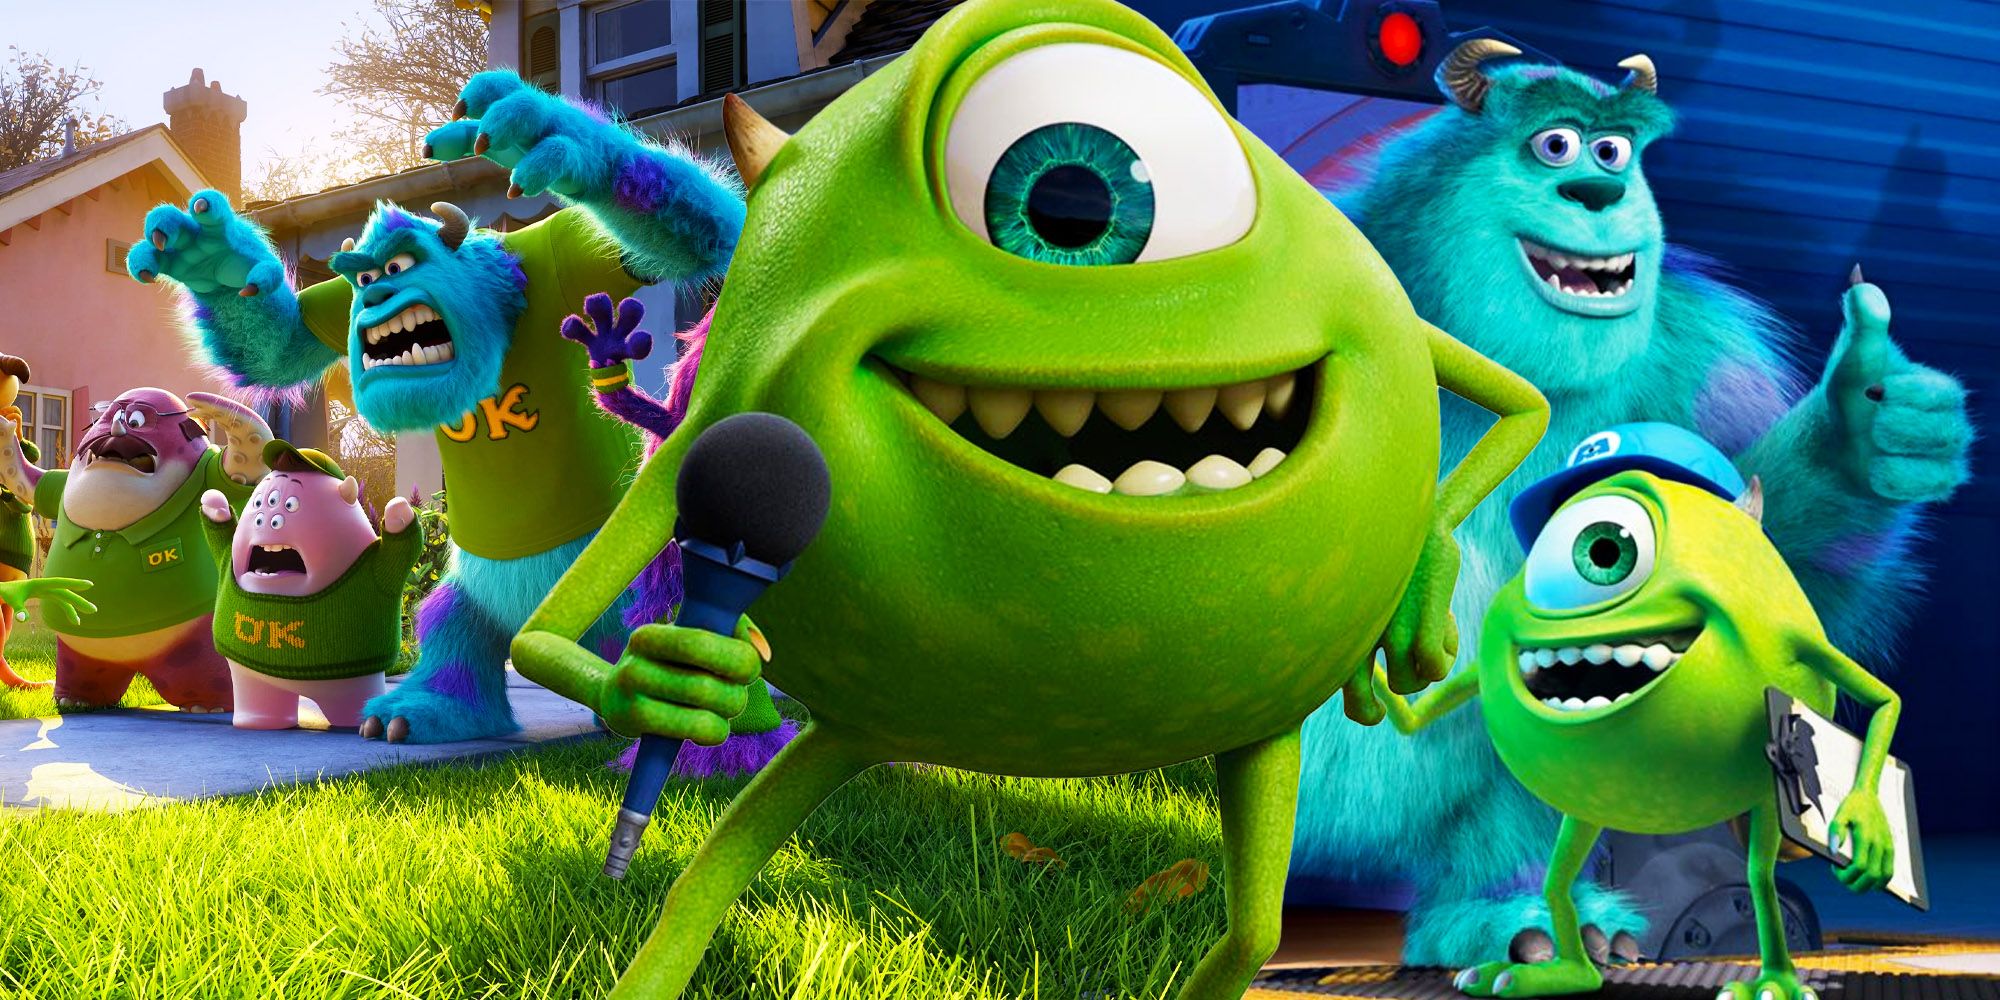 How Monsters At Work’s Animation Compares To Monsters, Inc.